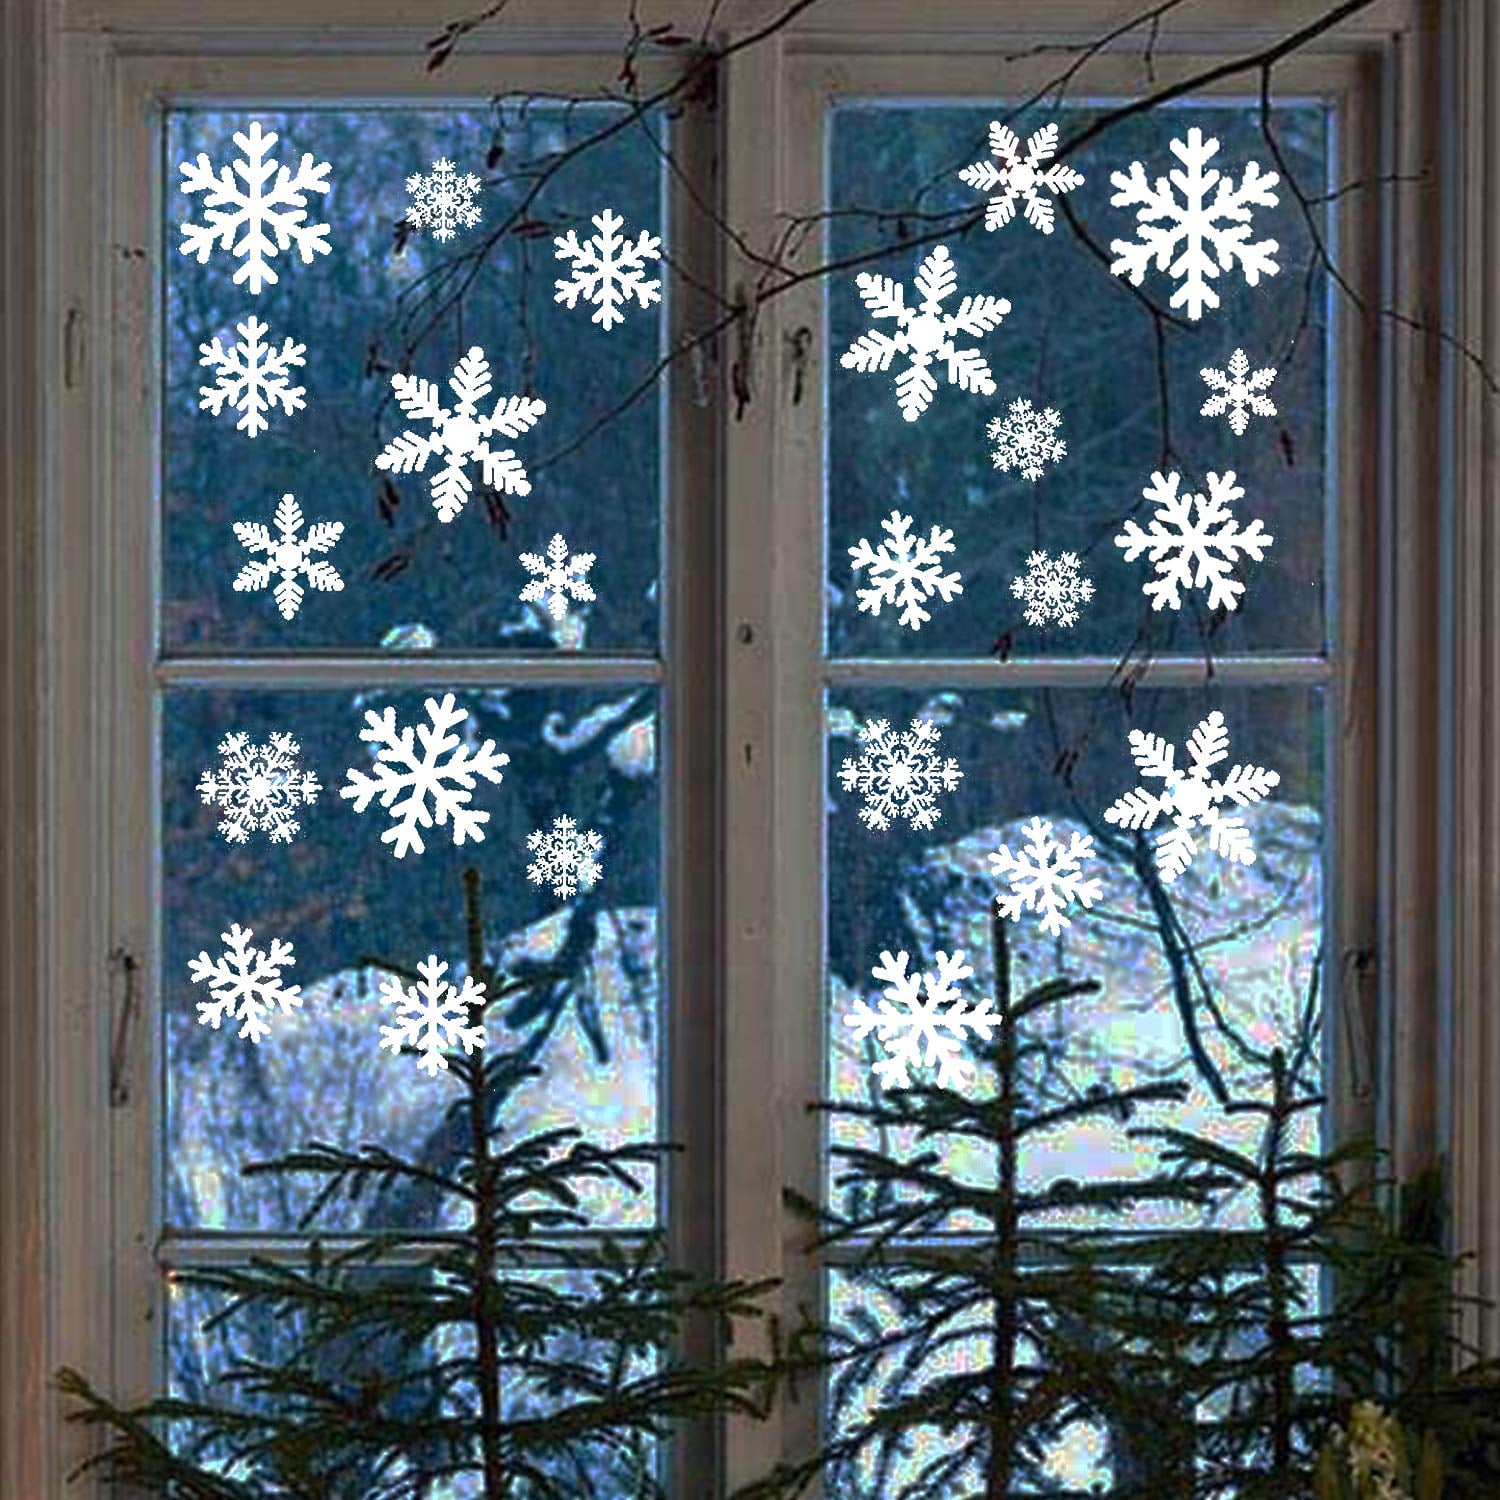 DERAYEE 104 pieces Window Static Stickers Snowflake Clings for Christmas Window Decorations 